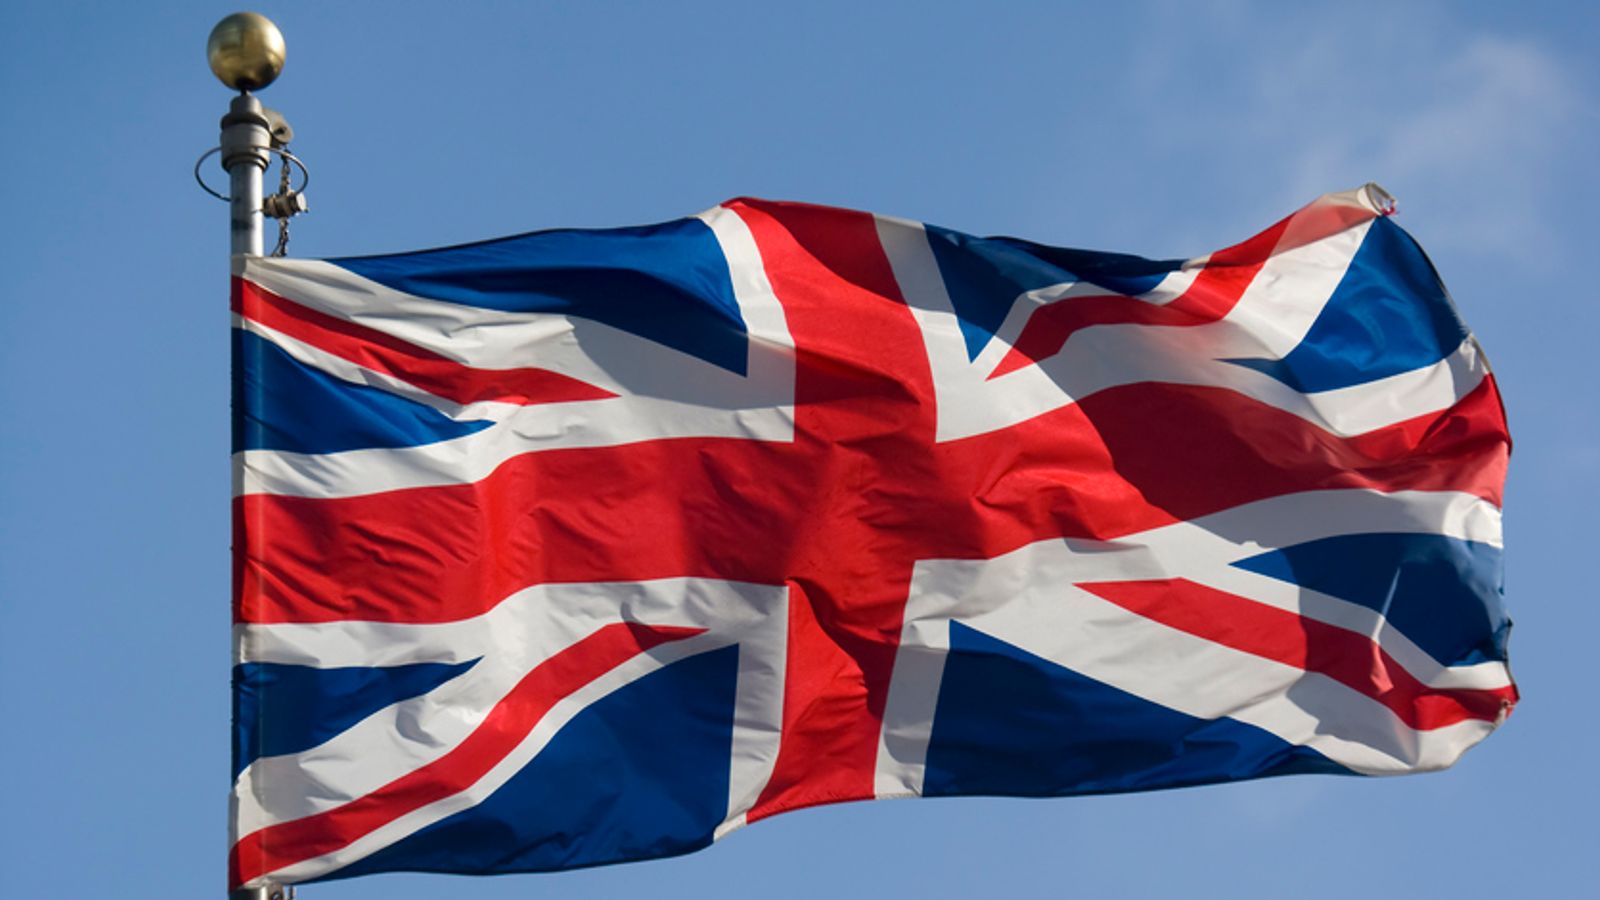 Man detained for hanging Union Jack towel from building in Turkey | UK ...